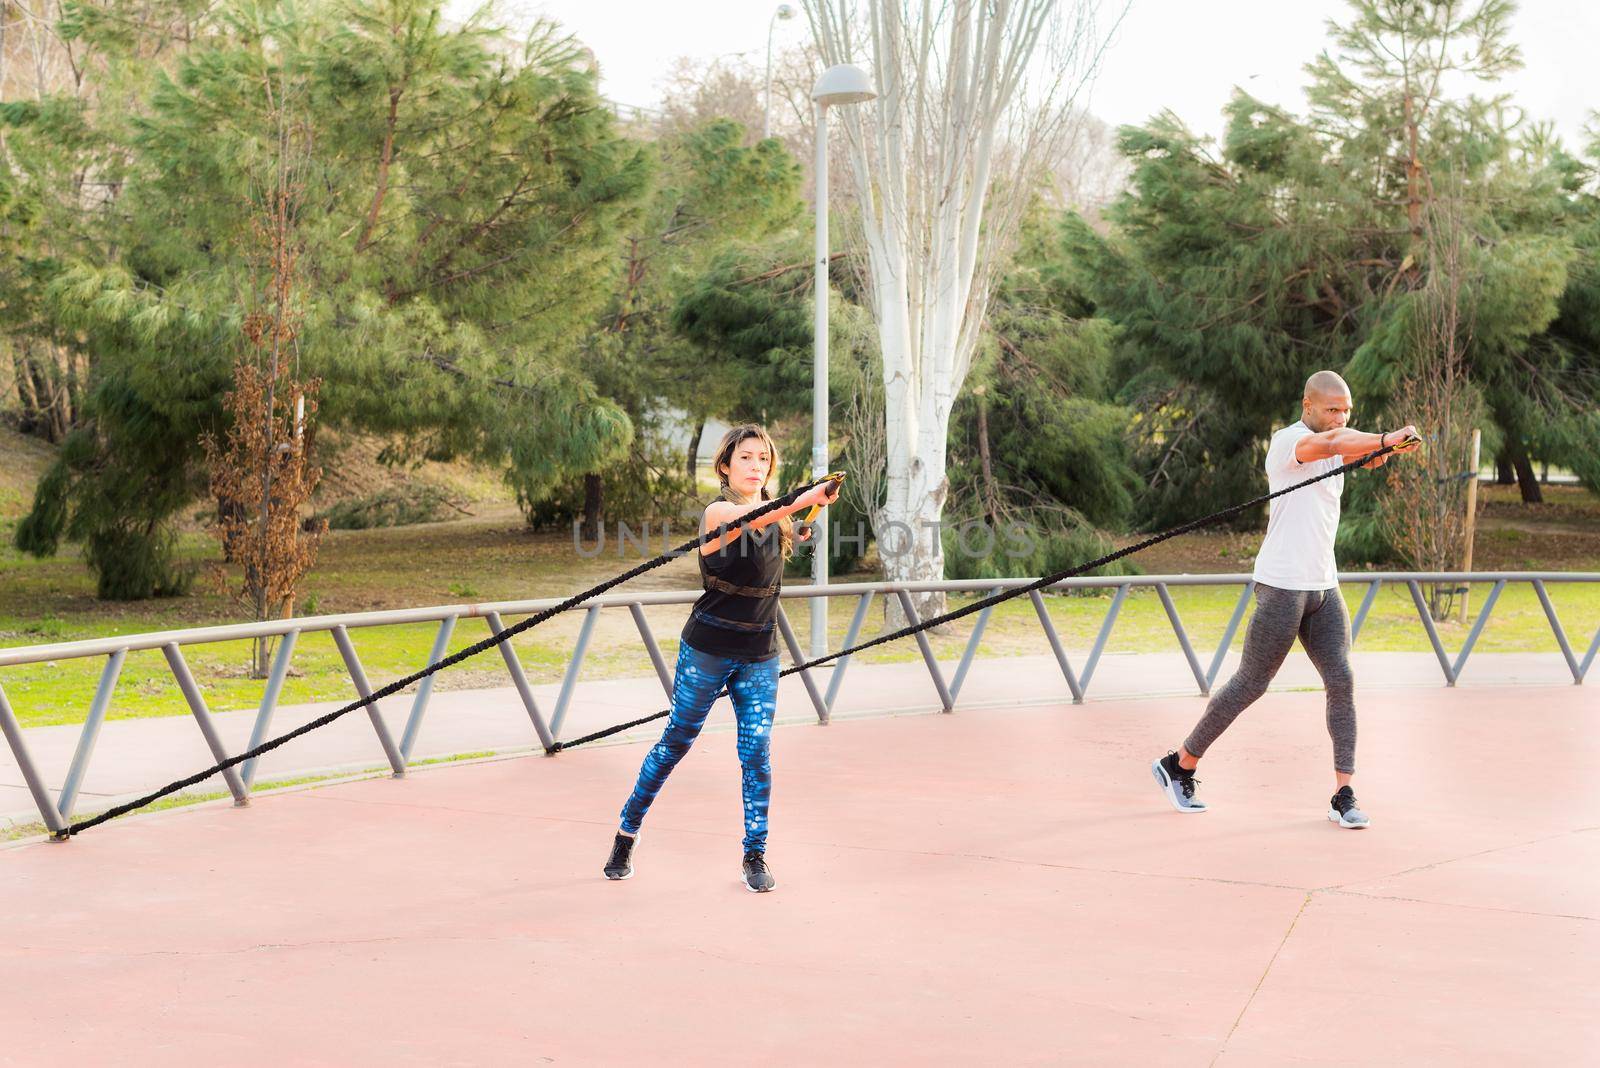 Fitness couple exercising with an elastic gym stick in the park. Multi-ethnic people exercising outside.